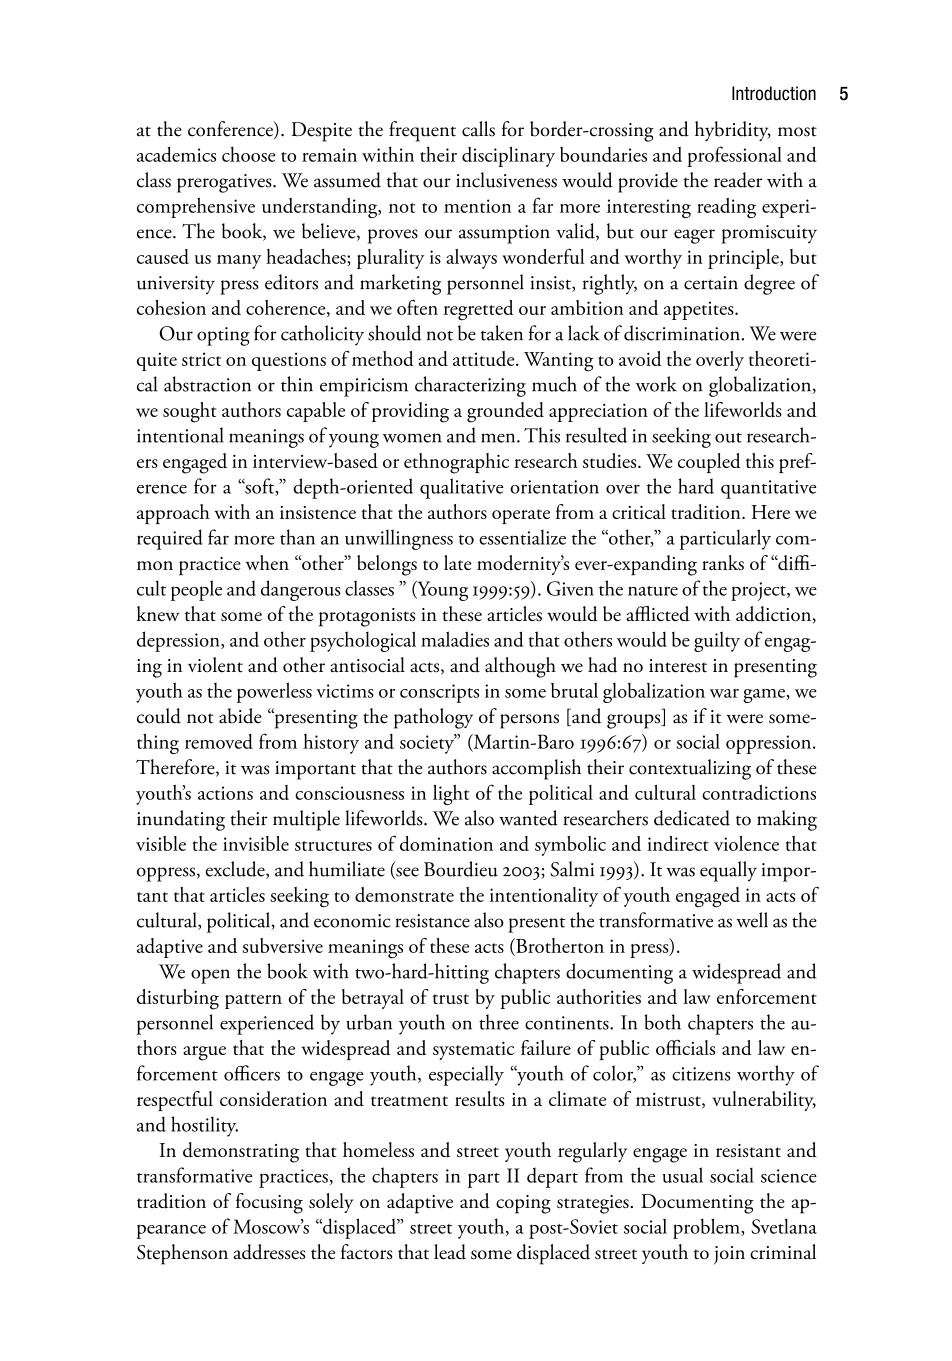 Globalizing the Streets: Cross-Cultural Perspectives on Youth, Social Control, and Empowerment page 5